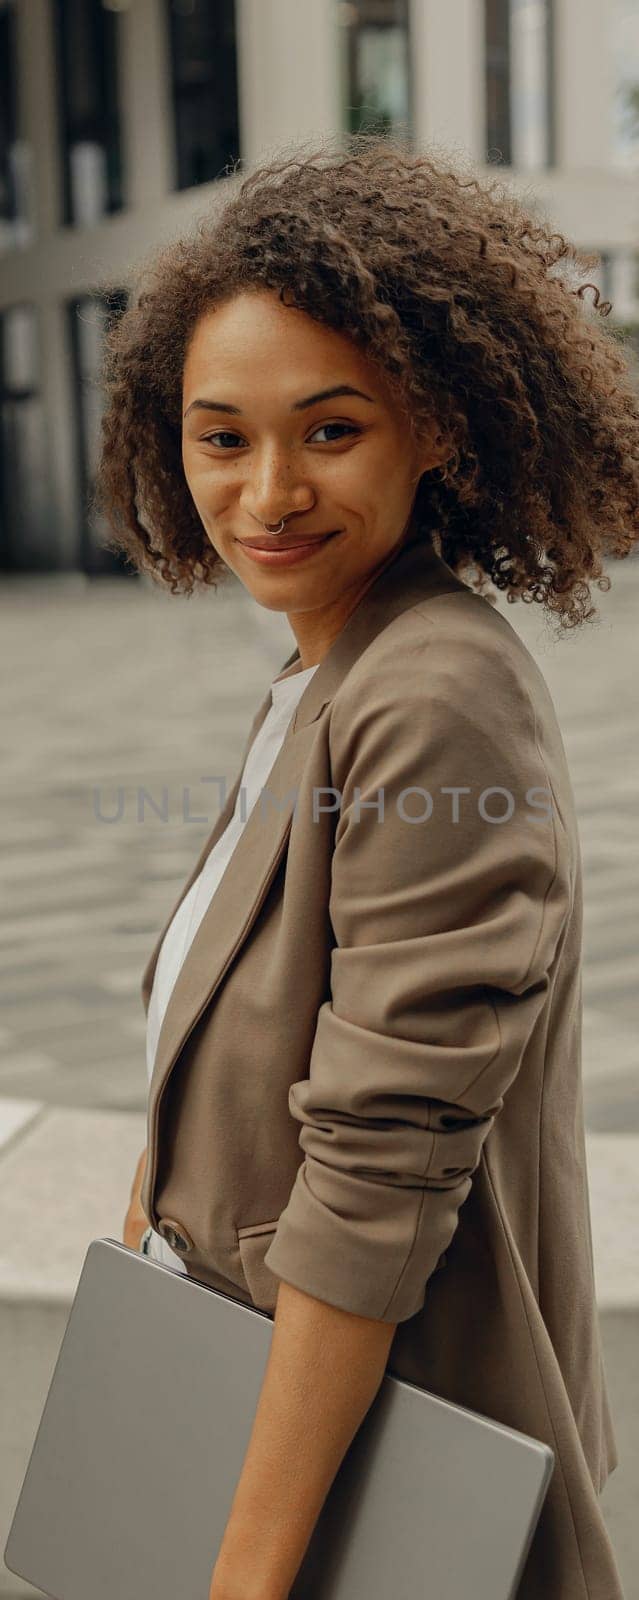 Smiling businesswoman standing with laptop on office building background during break time